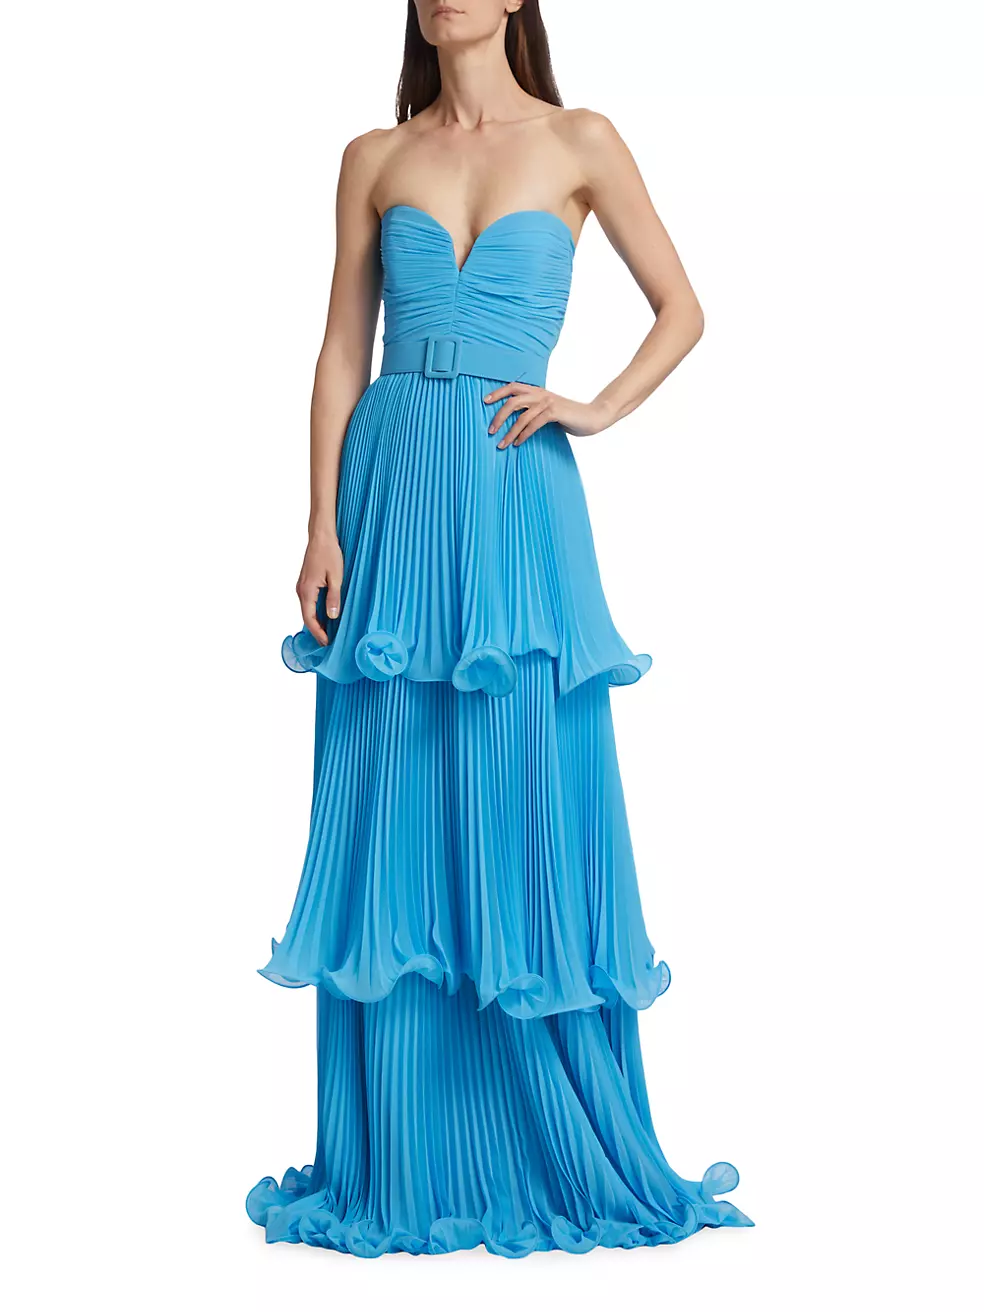 15+ Strapless Pleated Dress